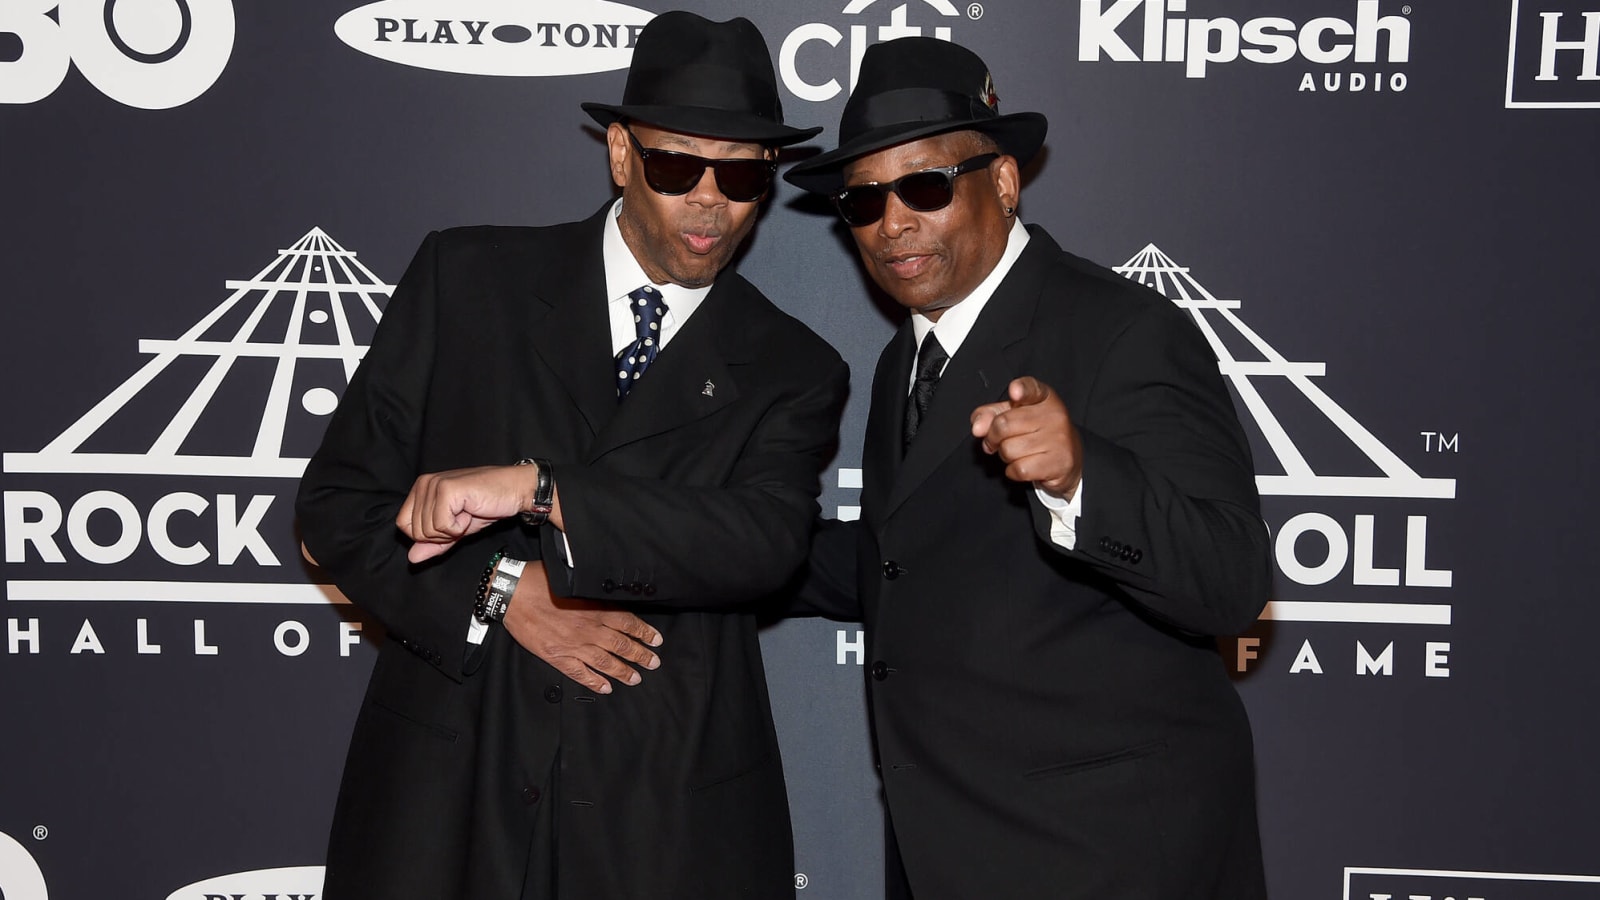 25 iconic songs produced by Jimmy Jam and Terry Lewis